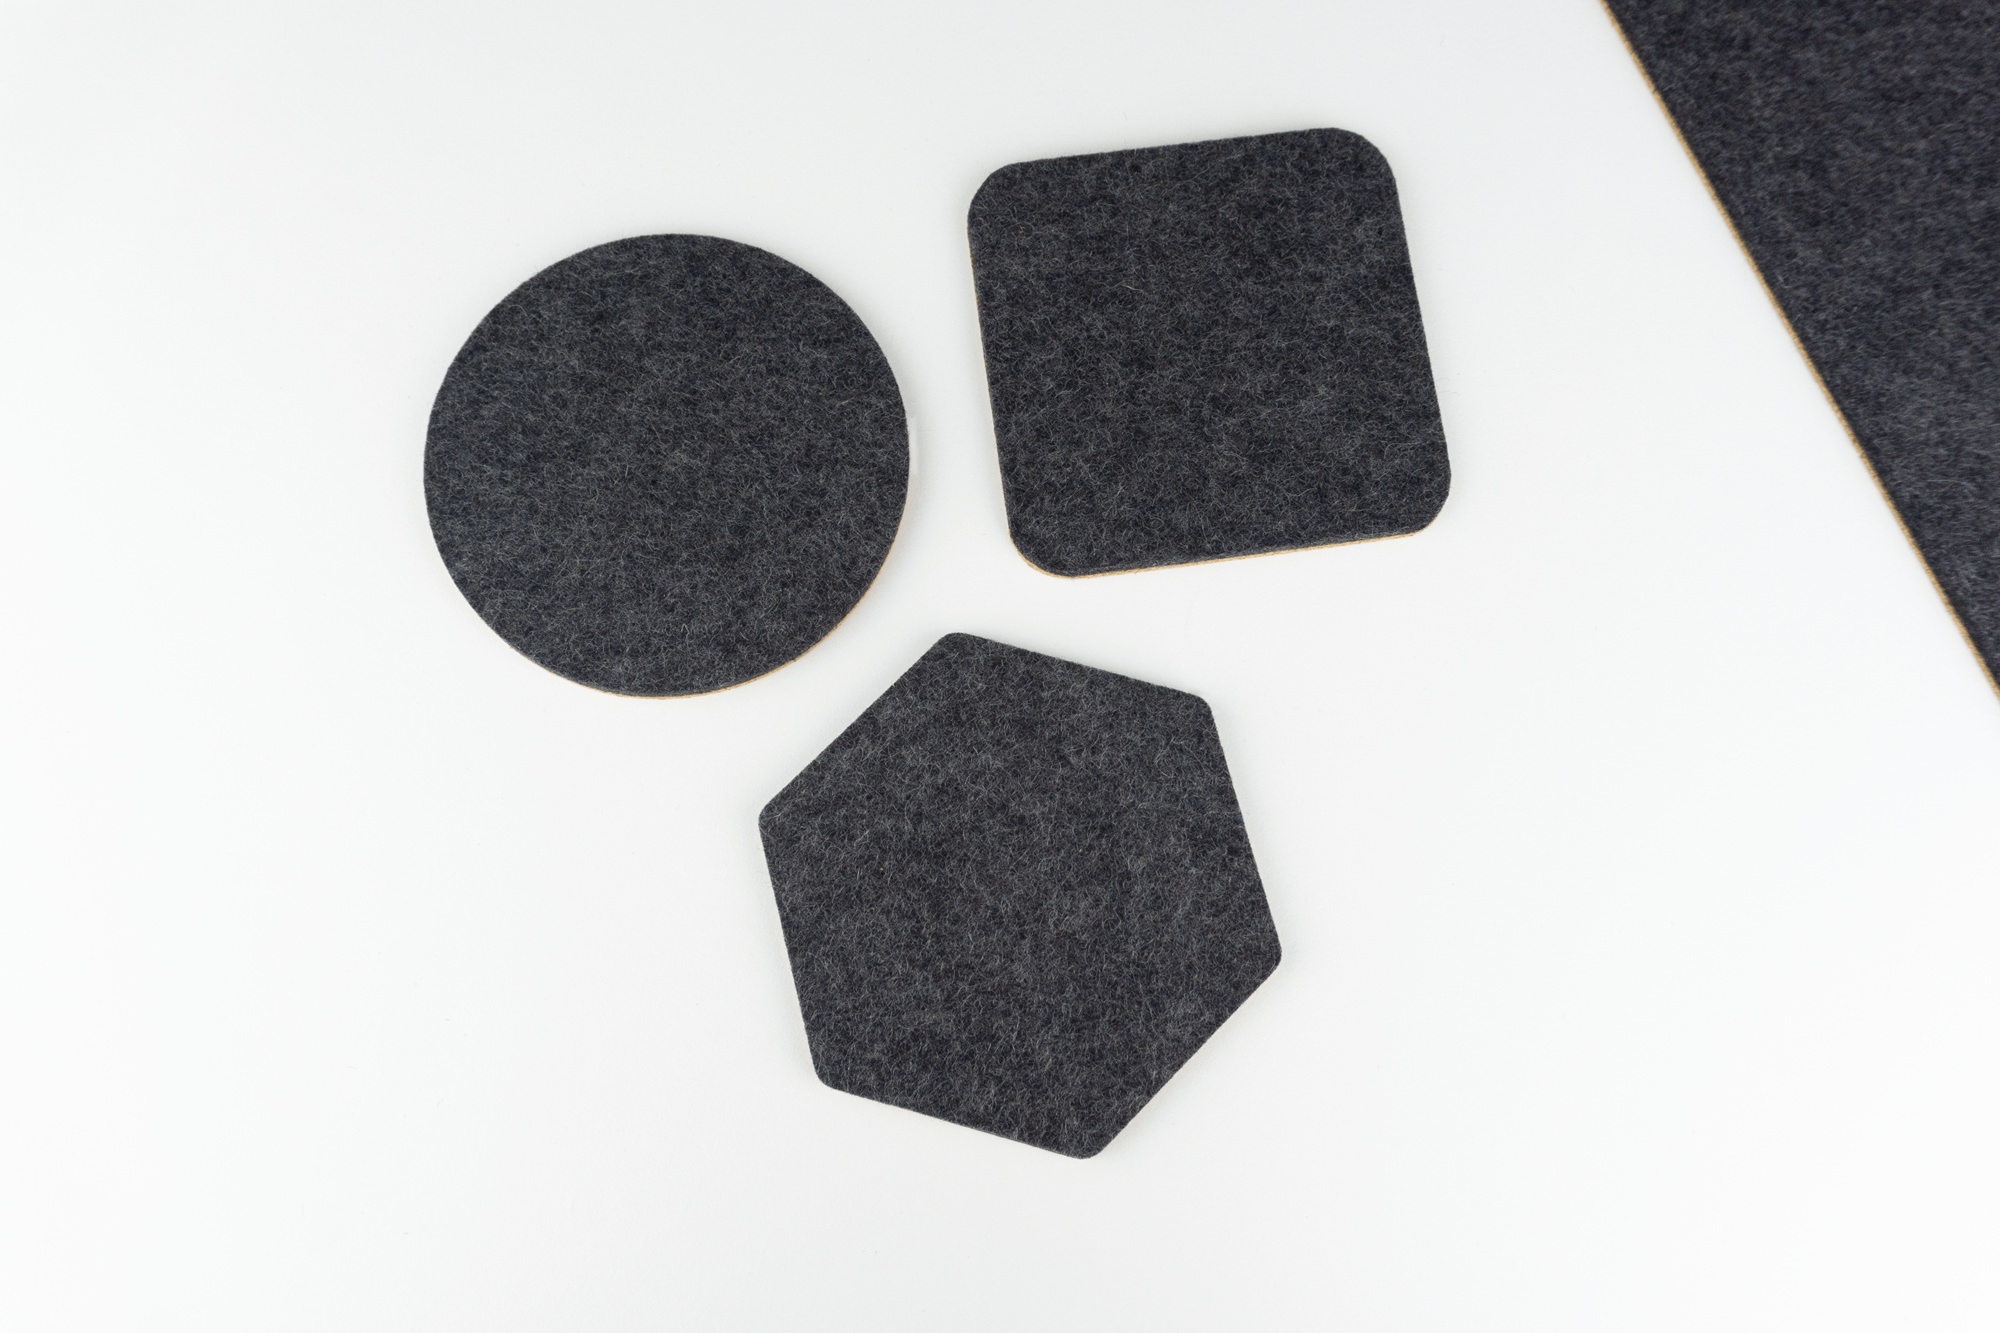 All of our coaster types on a white desk top. Our square, circle and hexagon coasters are shown in black wool felt.